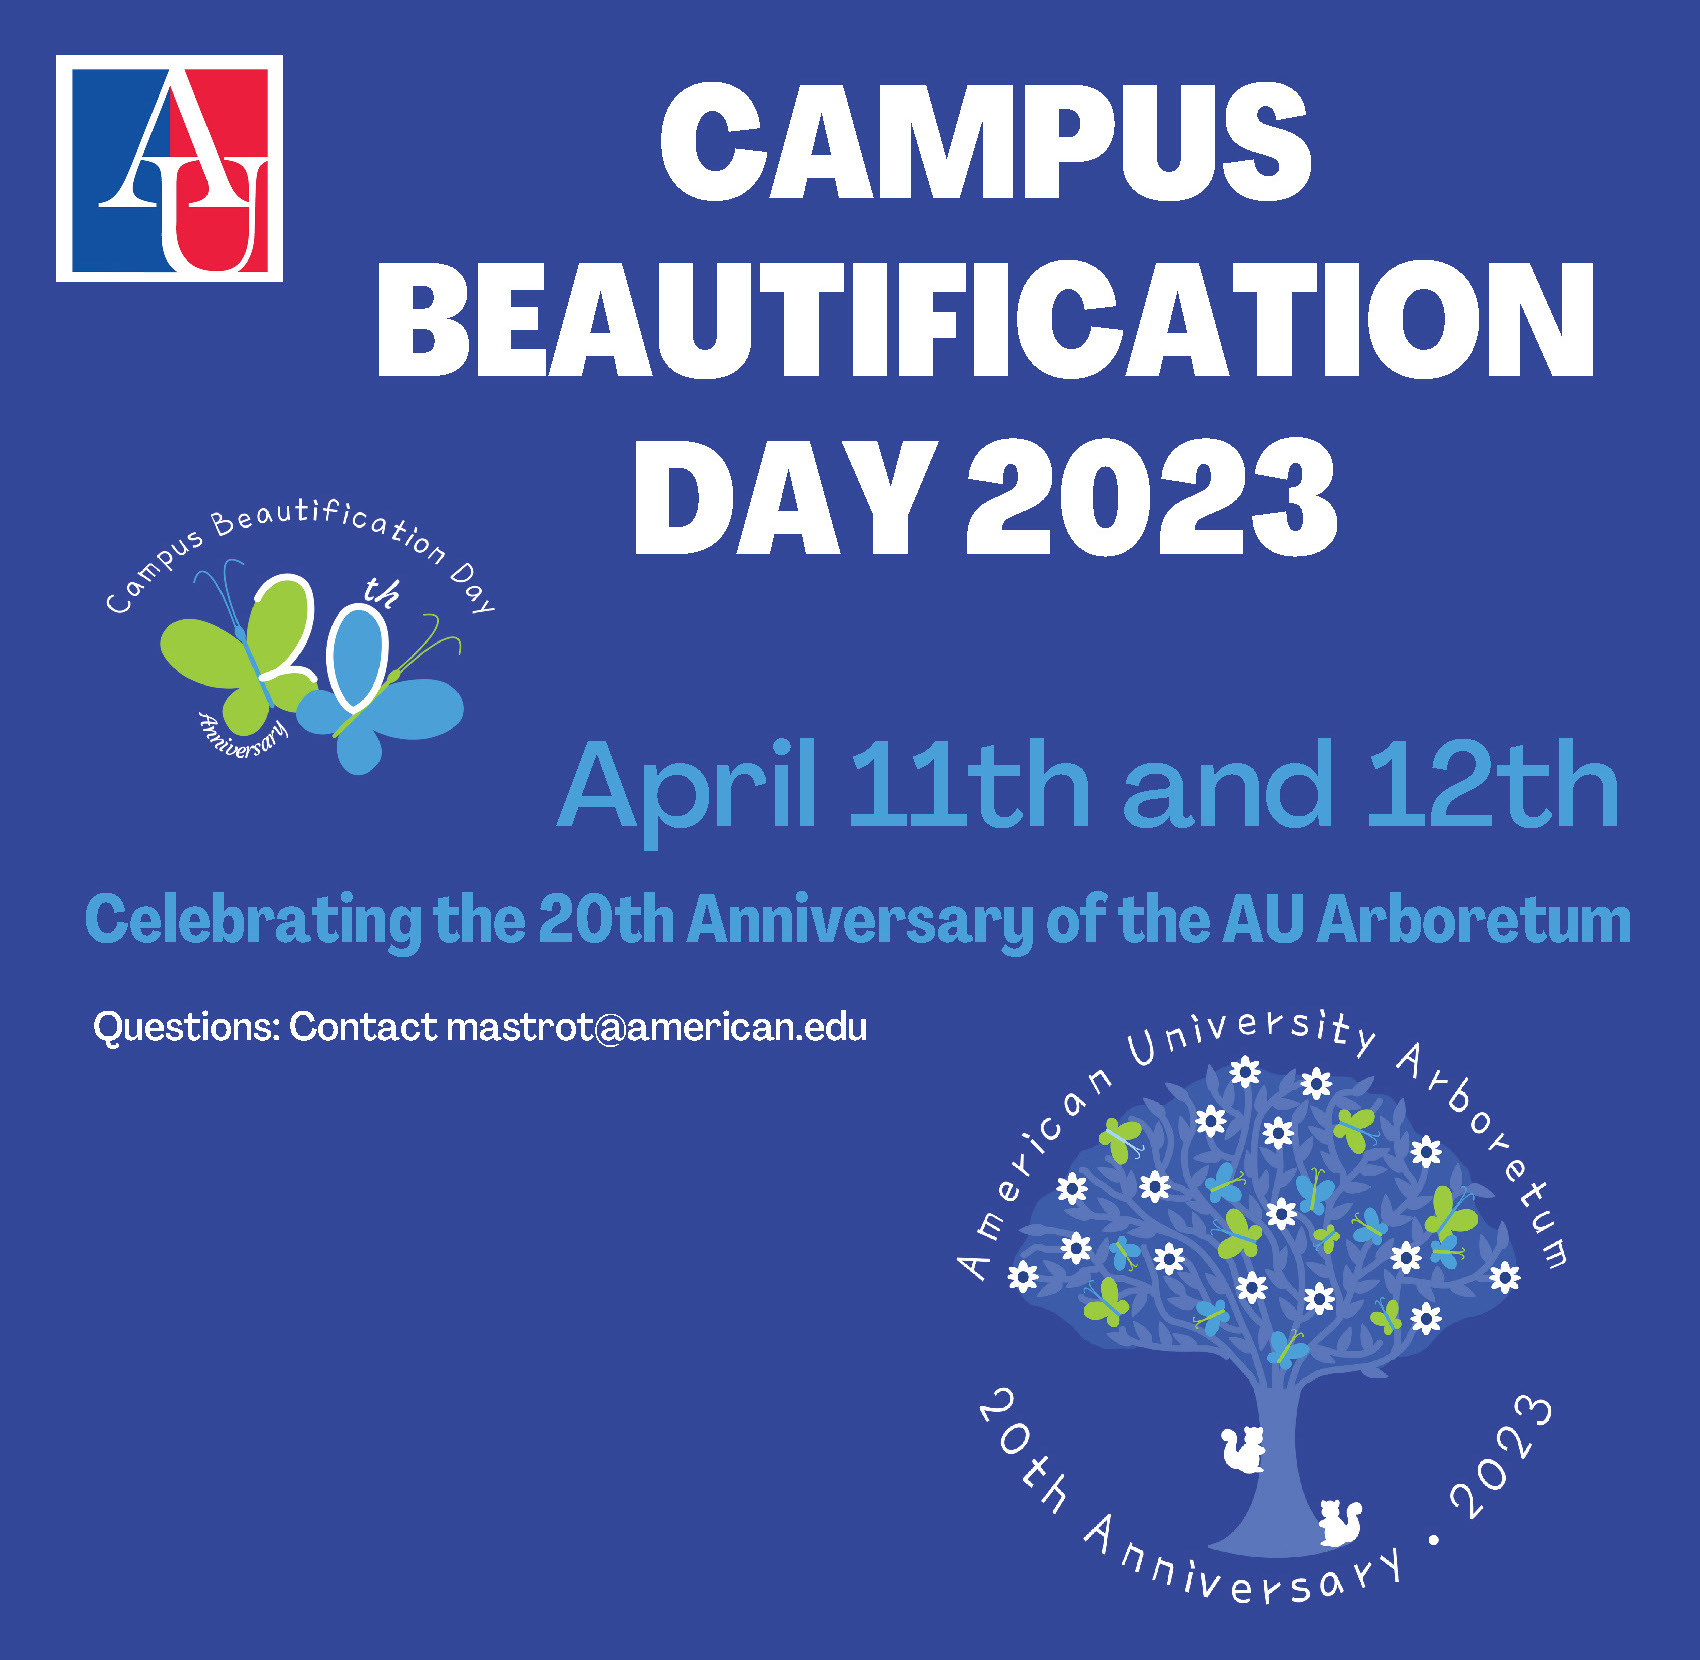 Campus Beautification Day Poster 2023